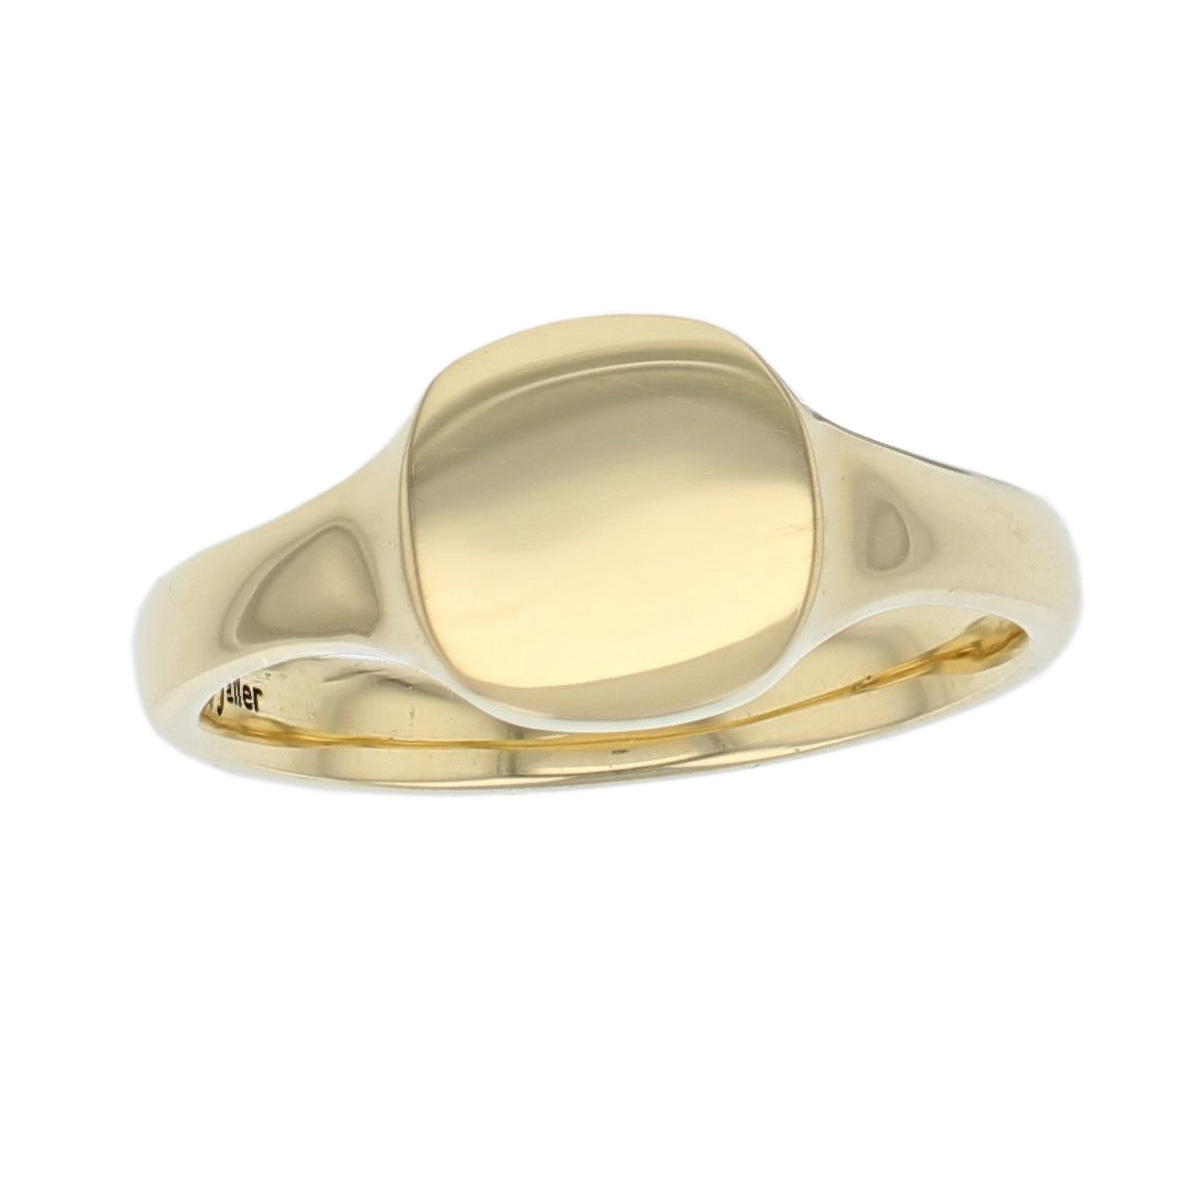 Oval men's ladies solid 18ct yellow gold signet dress ring designed & hand crafted by Faller of Derry/ Londonderry, personalised engraving, plain, non stone, precious jewellery, jewelry for men ladies, men's ladies jewellery, mens ladies jewellery